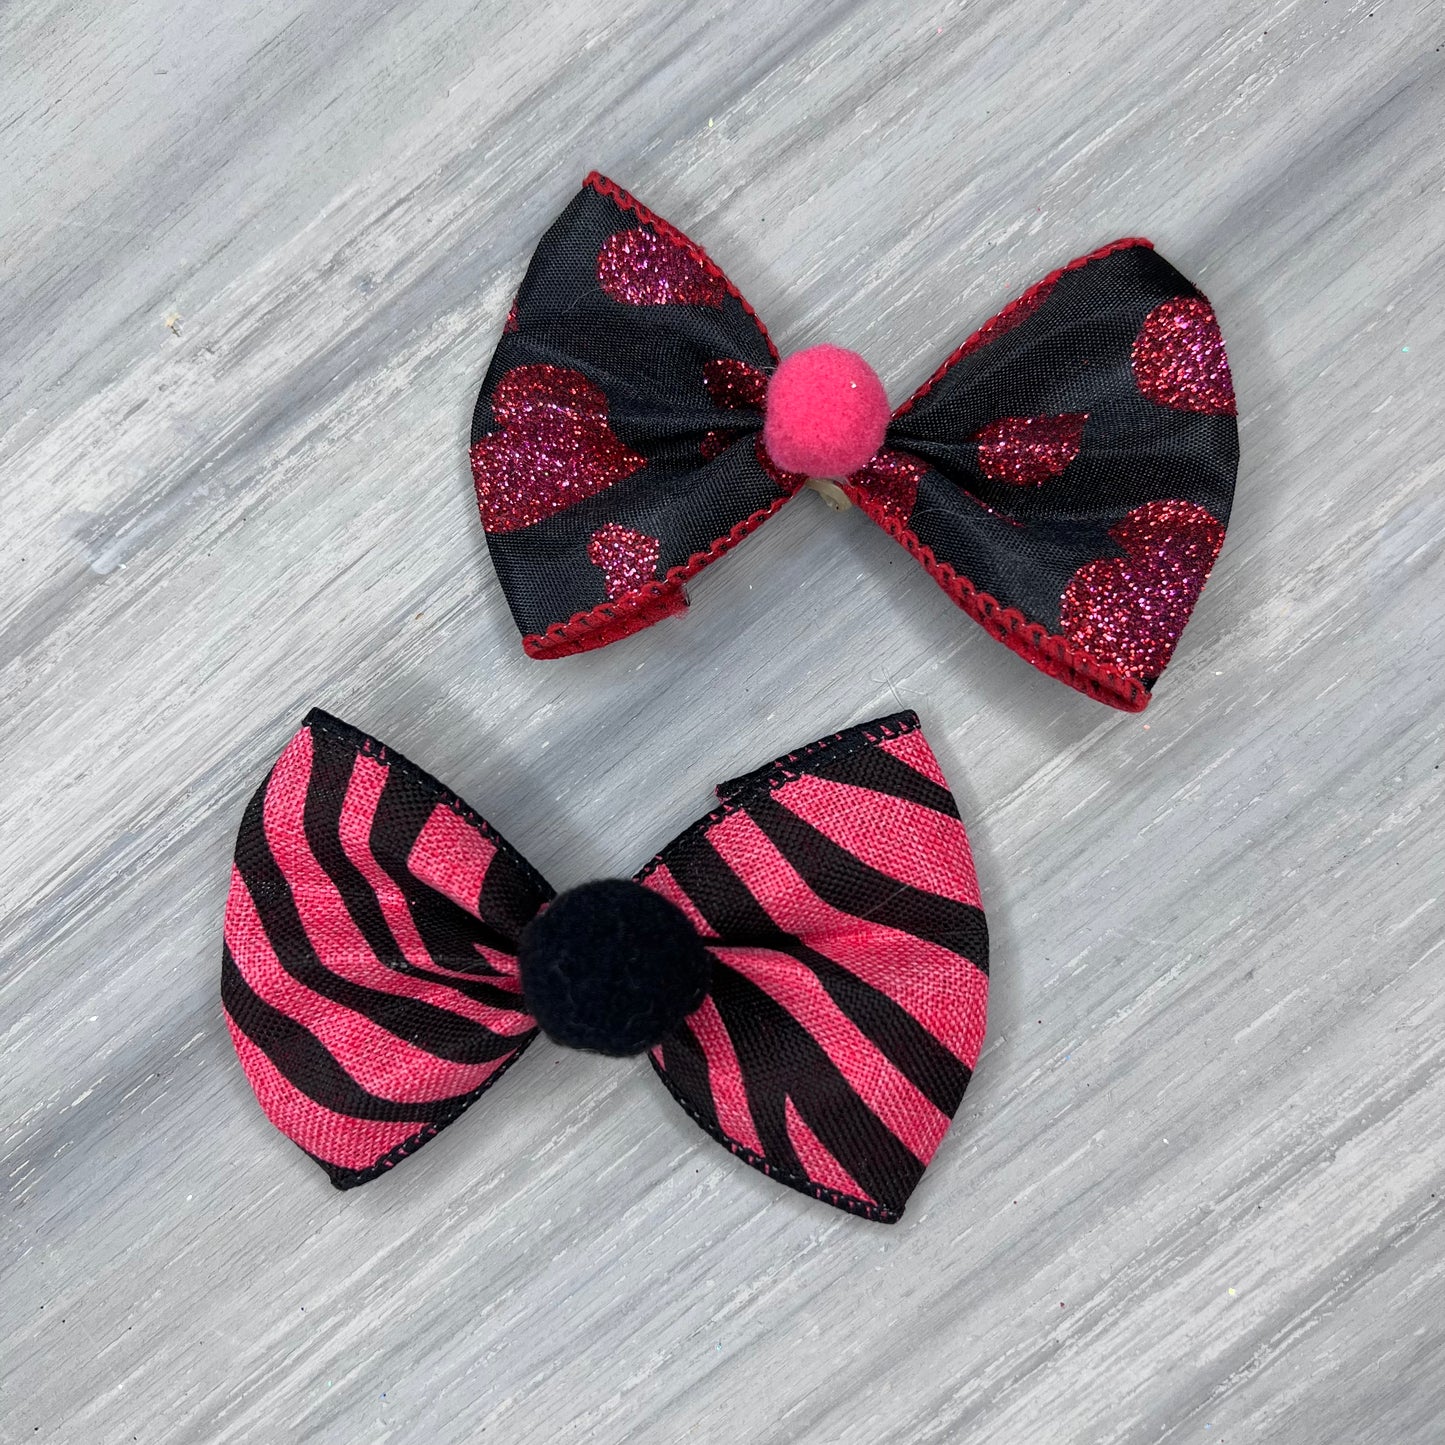 Sassy Valentine - Over the Top - 6 Large Bows